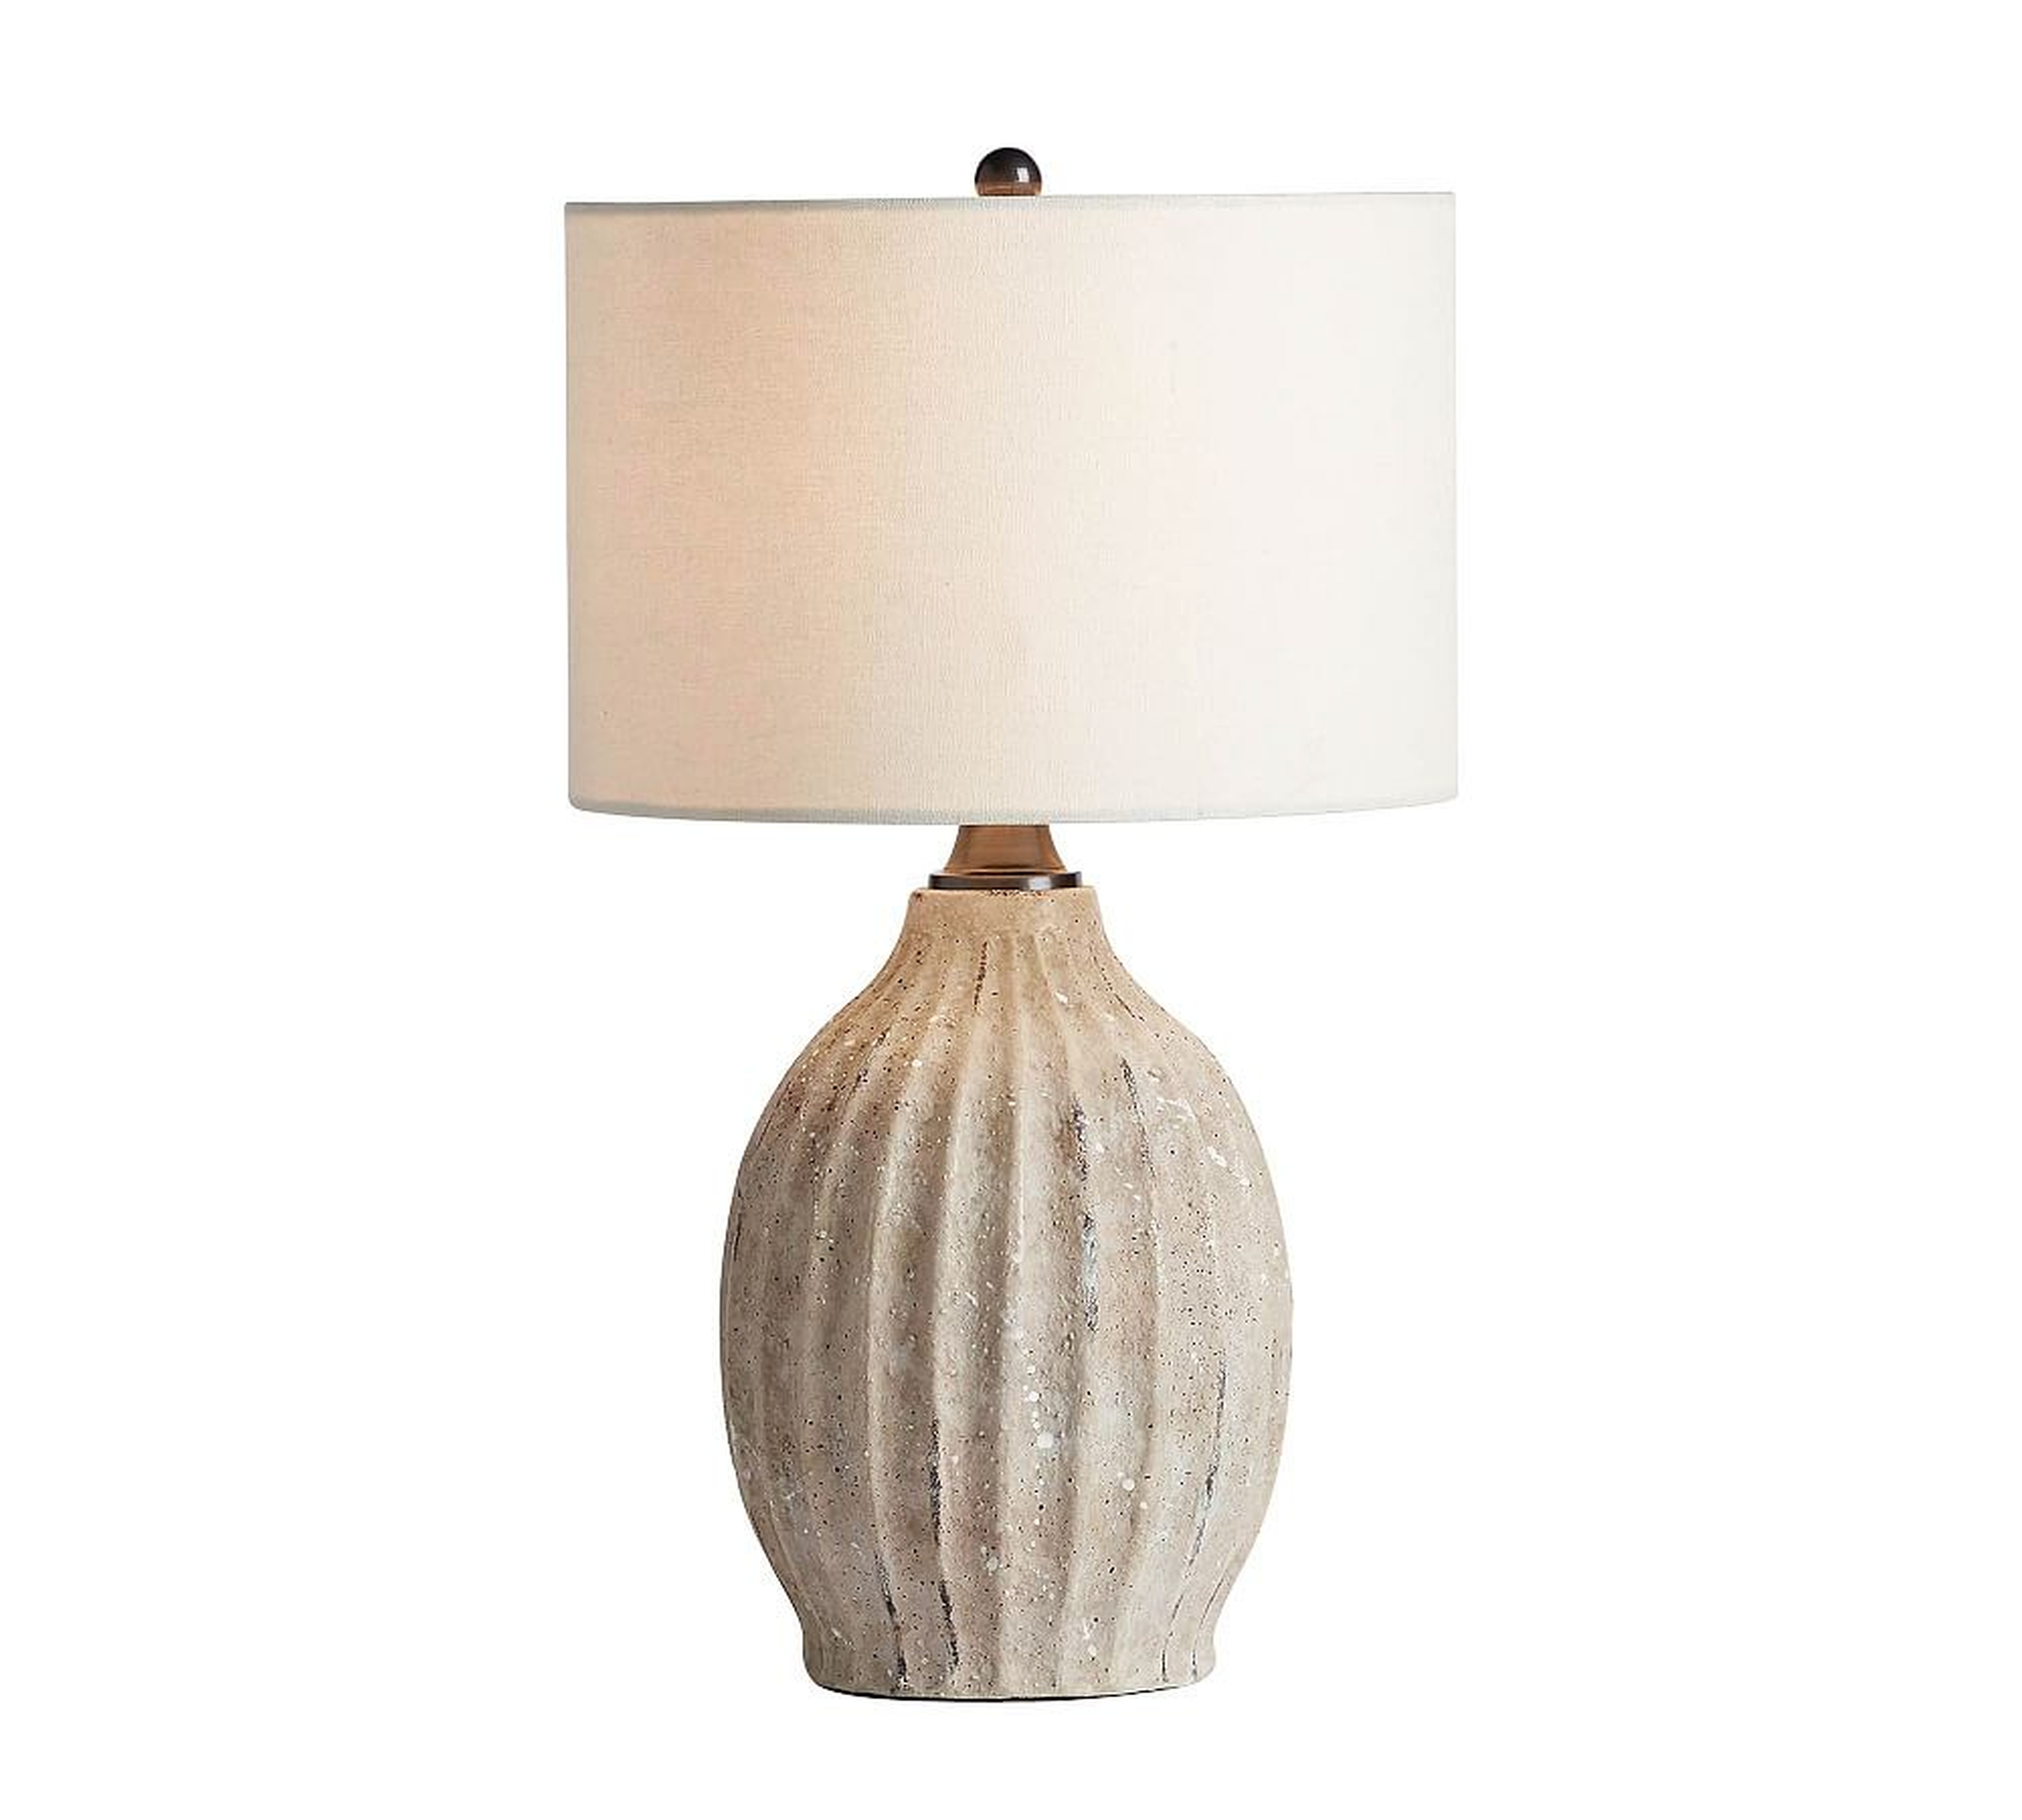 Anders Accent Lamp, Rustic White Base With Small Gallery Straight Sided Shade, 21", White - Pottery Barn